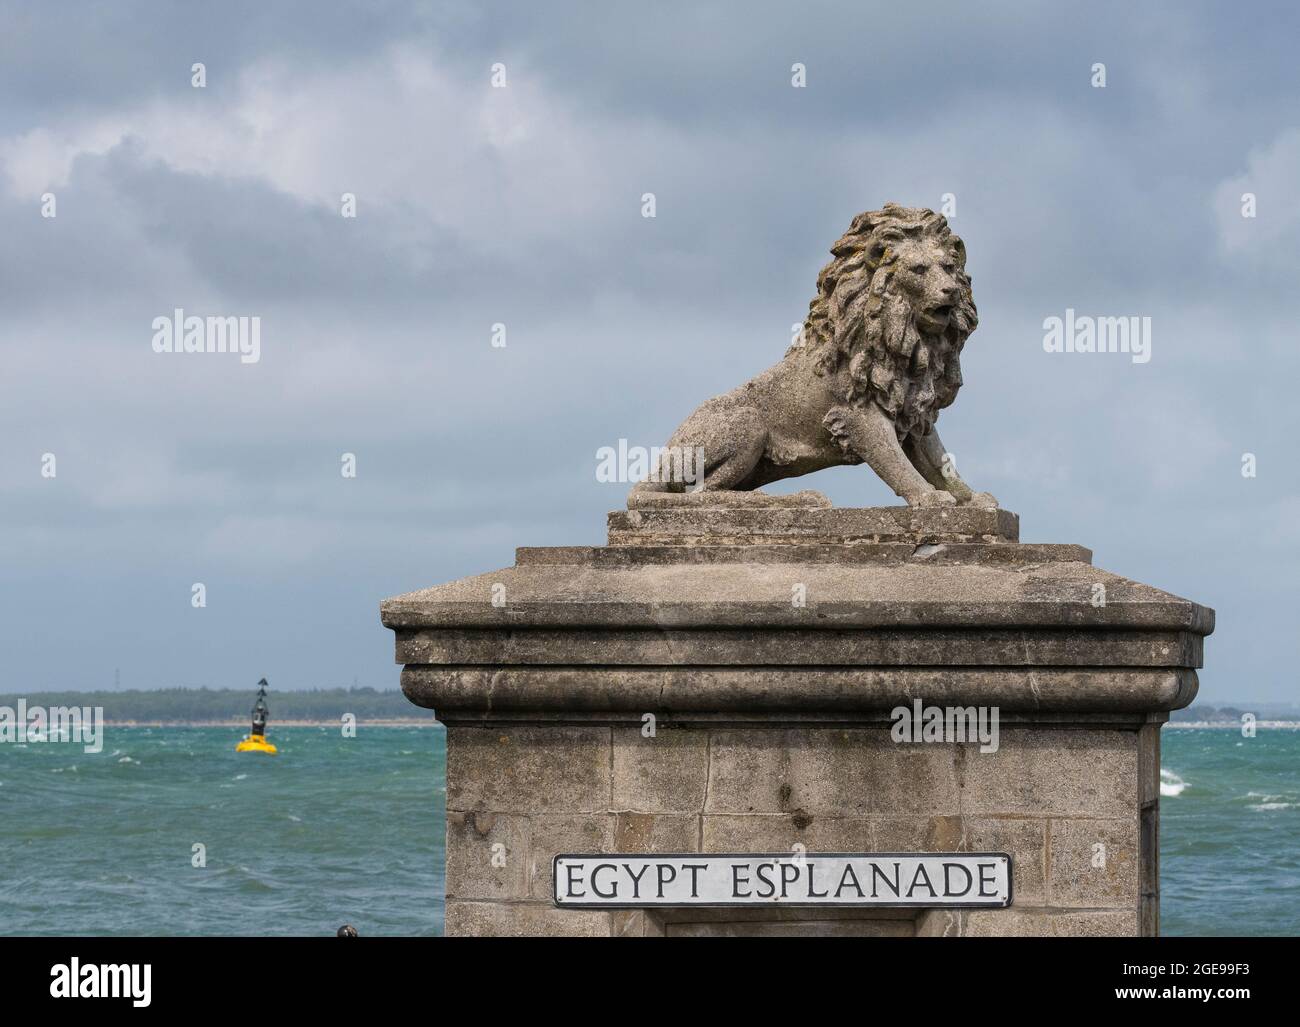 Statue of lion on Egypt Esplanade in the seaside town of Cowes, Isle of Wight, England Stock Photo